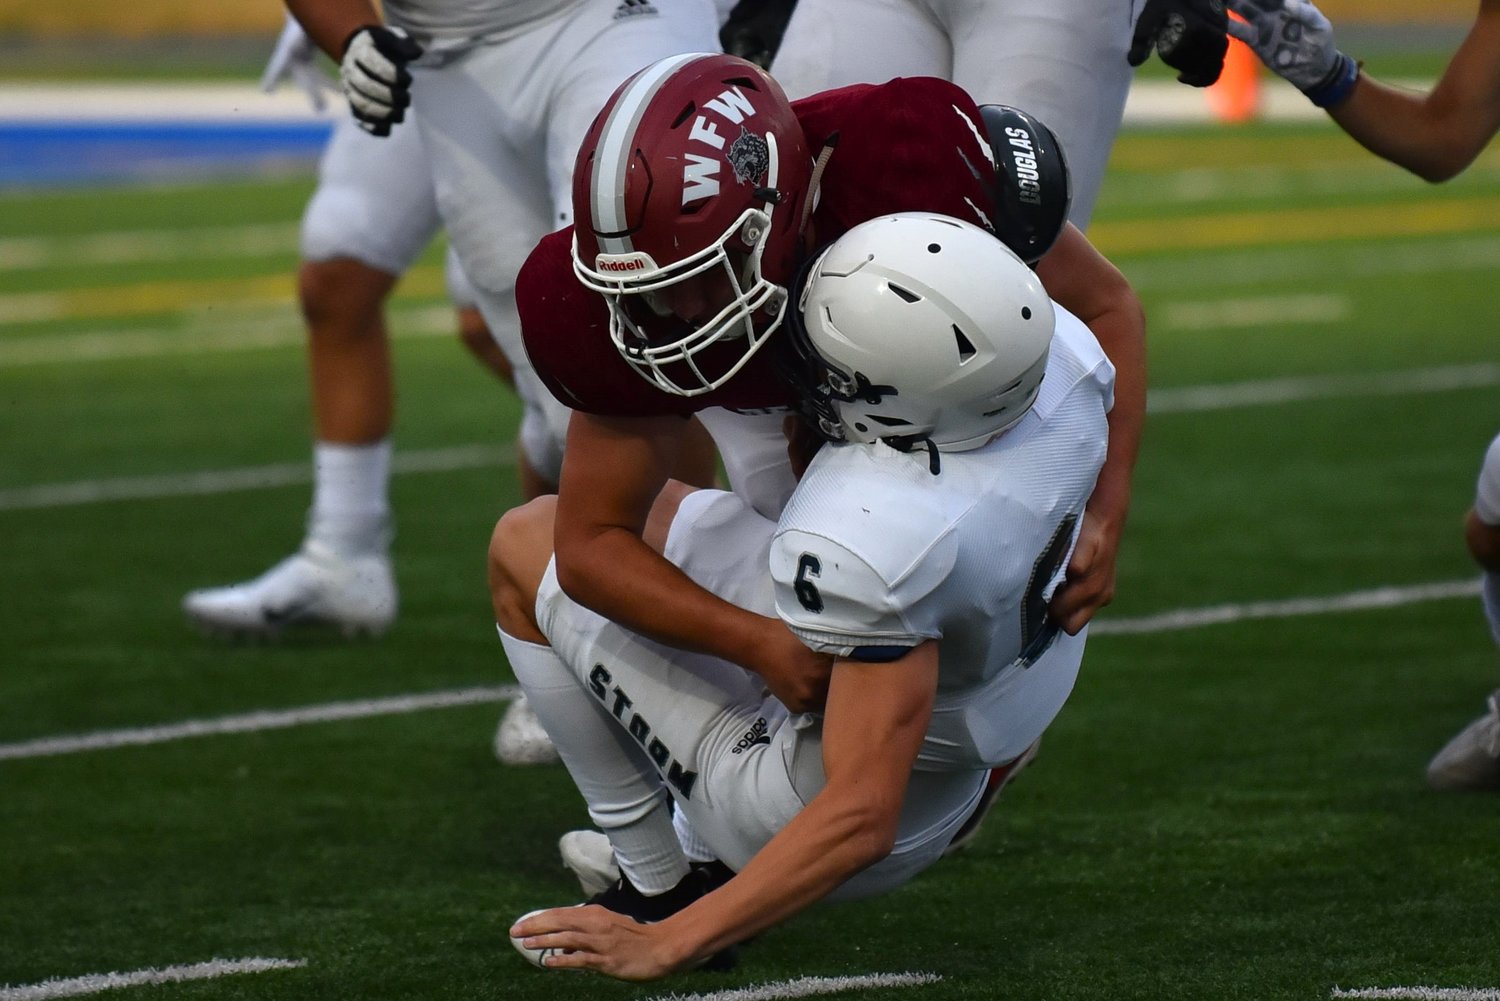 W.F. West's Andrew Penland takes down a Skyview ballcarrier in the backfield during a jamboree at Kelso's Schroeder Field on Aug. 26.